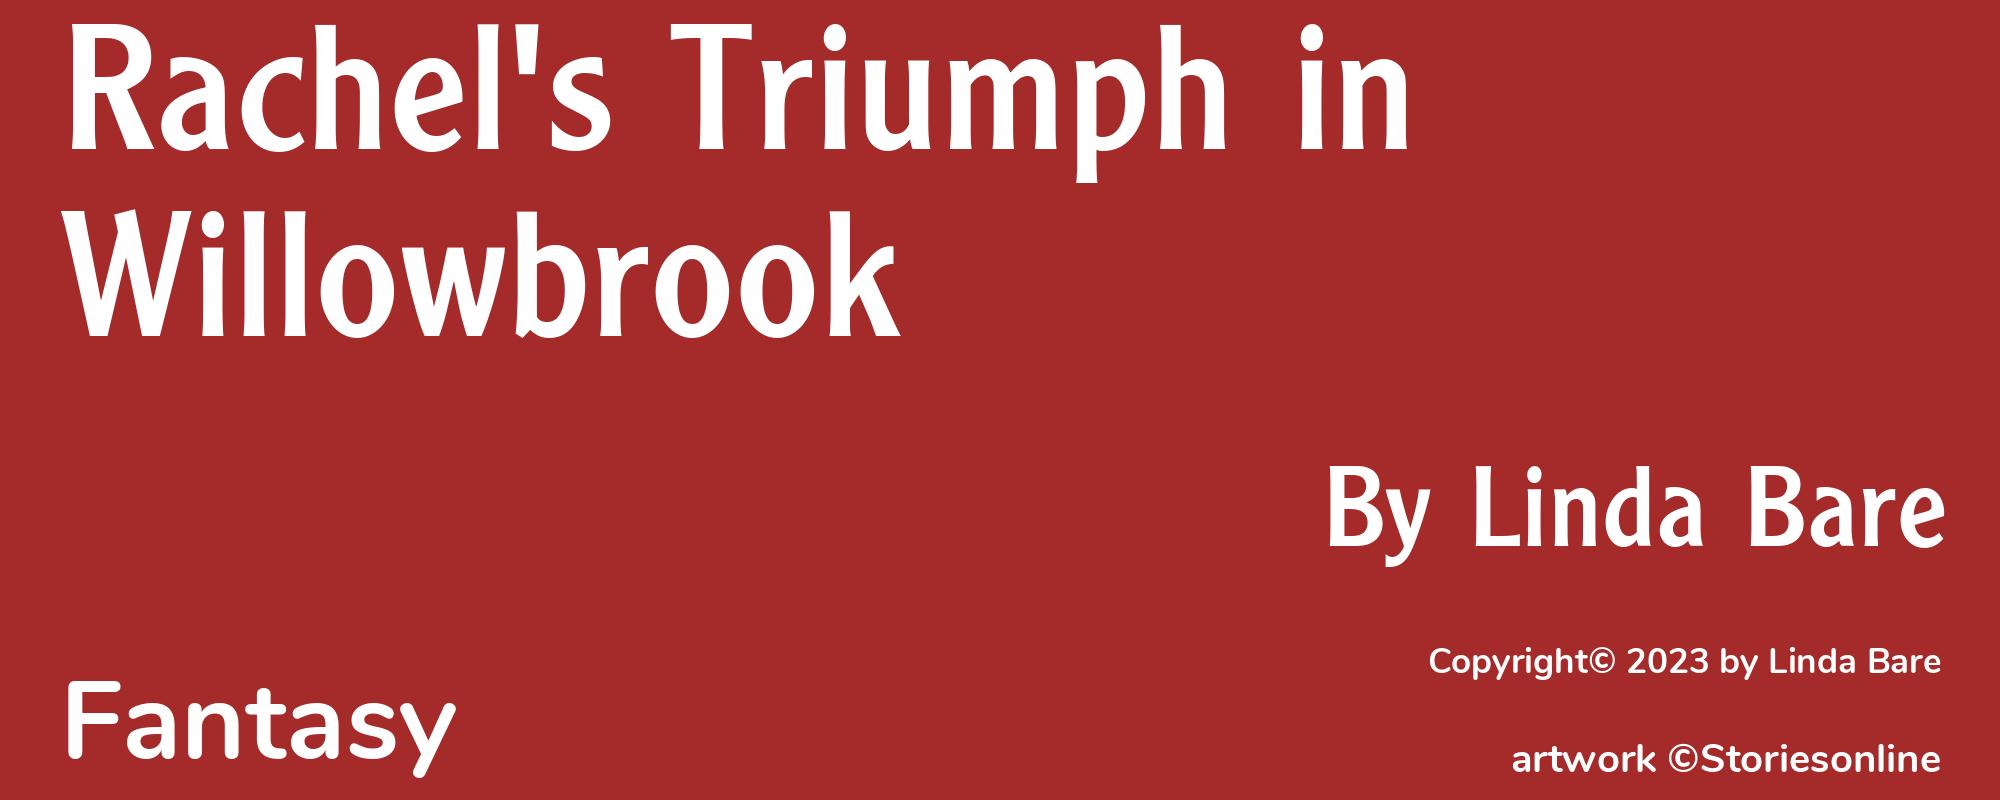 Rachel's Triumph in Willowbrook - Cover